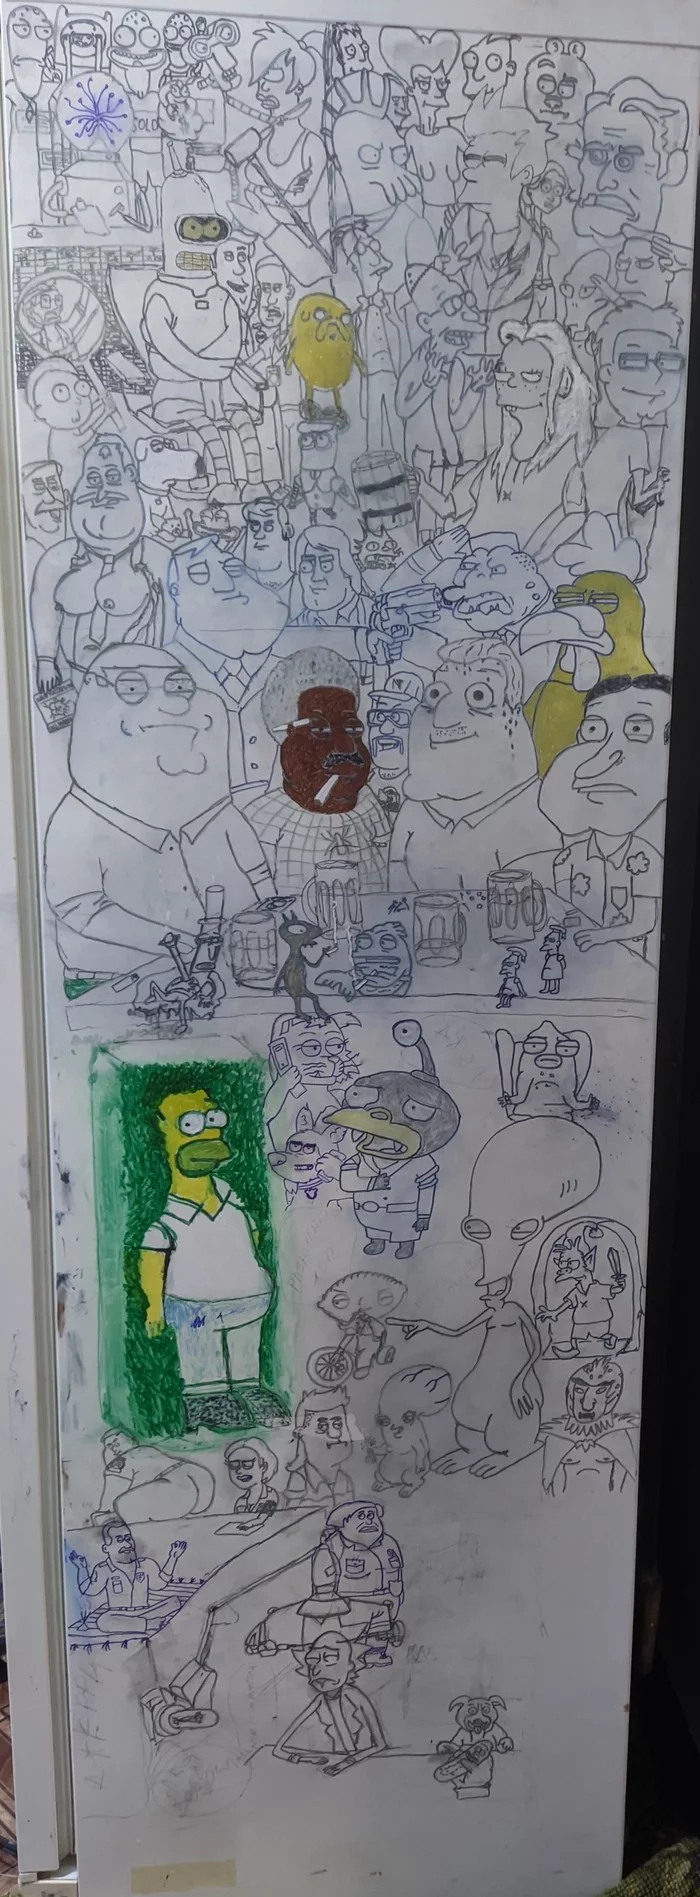 How I drew the fridge. Part 2 - Longpost, Rick and Morty, Brickleberry, Disappointment (animated series), Solar Opposites (animated series), Adventure Time, American Daddy, Family guy, The Simpsons, Futurama, Strange humor, Cartoons, Refrigerator, My